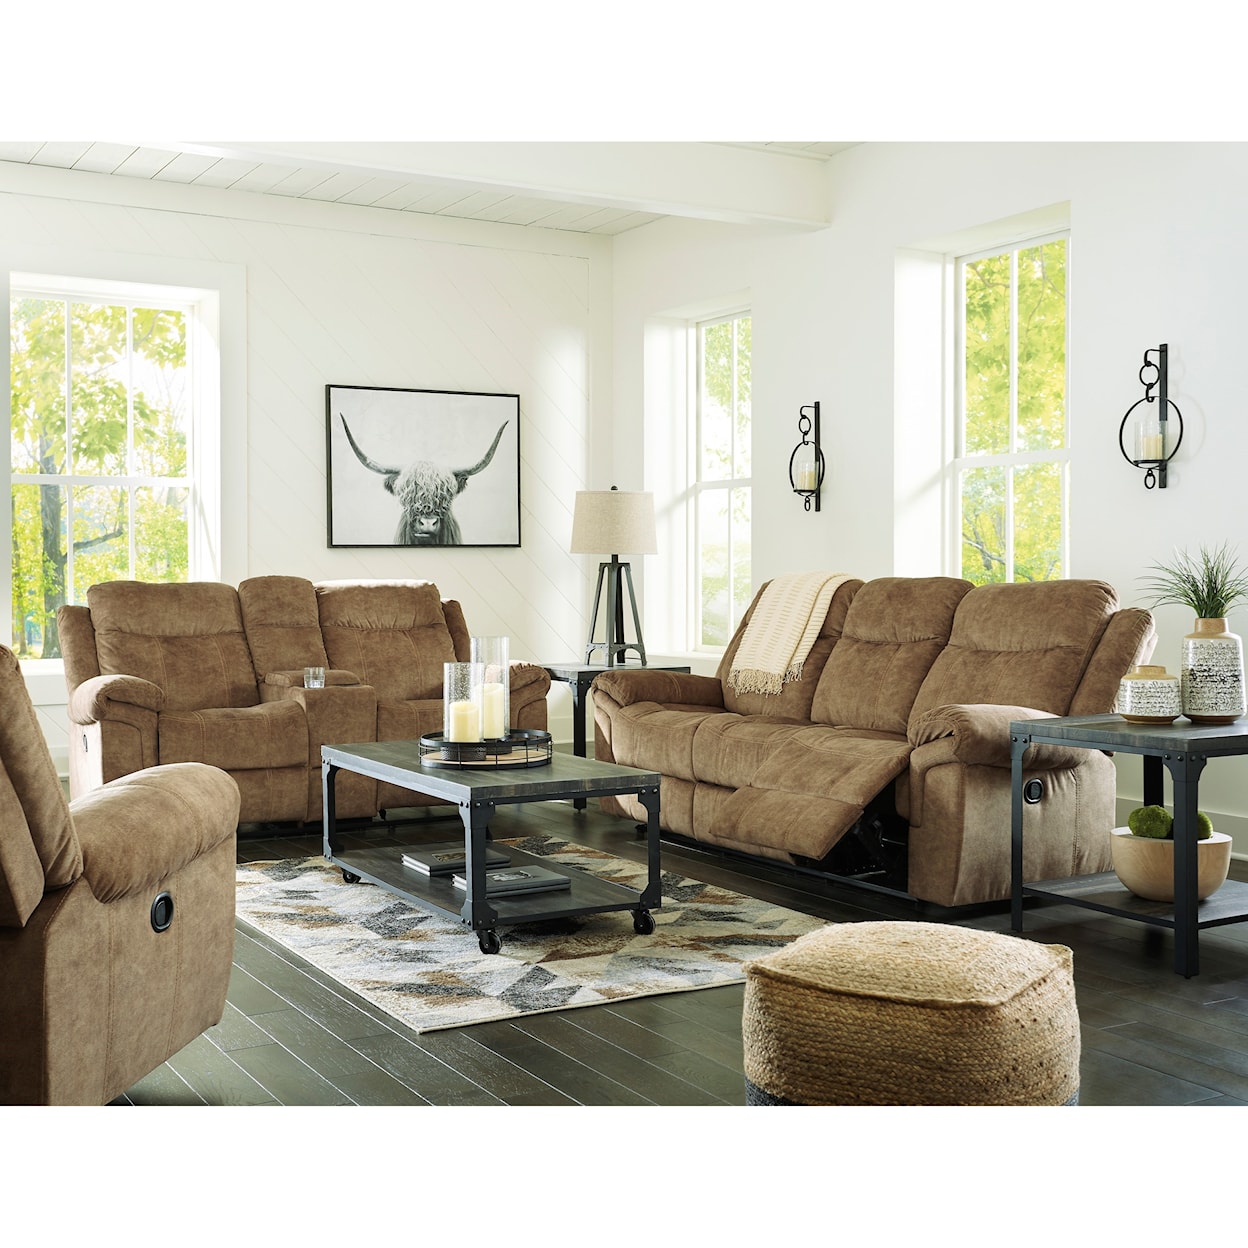 Signature Design by Ashley Huddle-Up Reclining Living Room Group